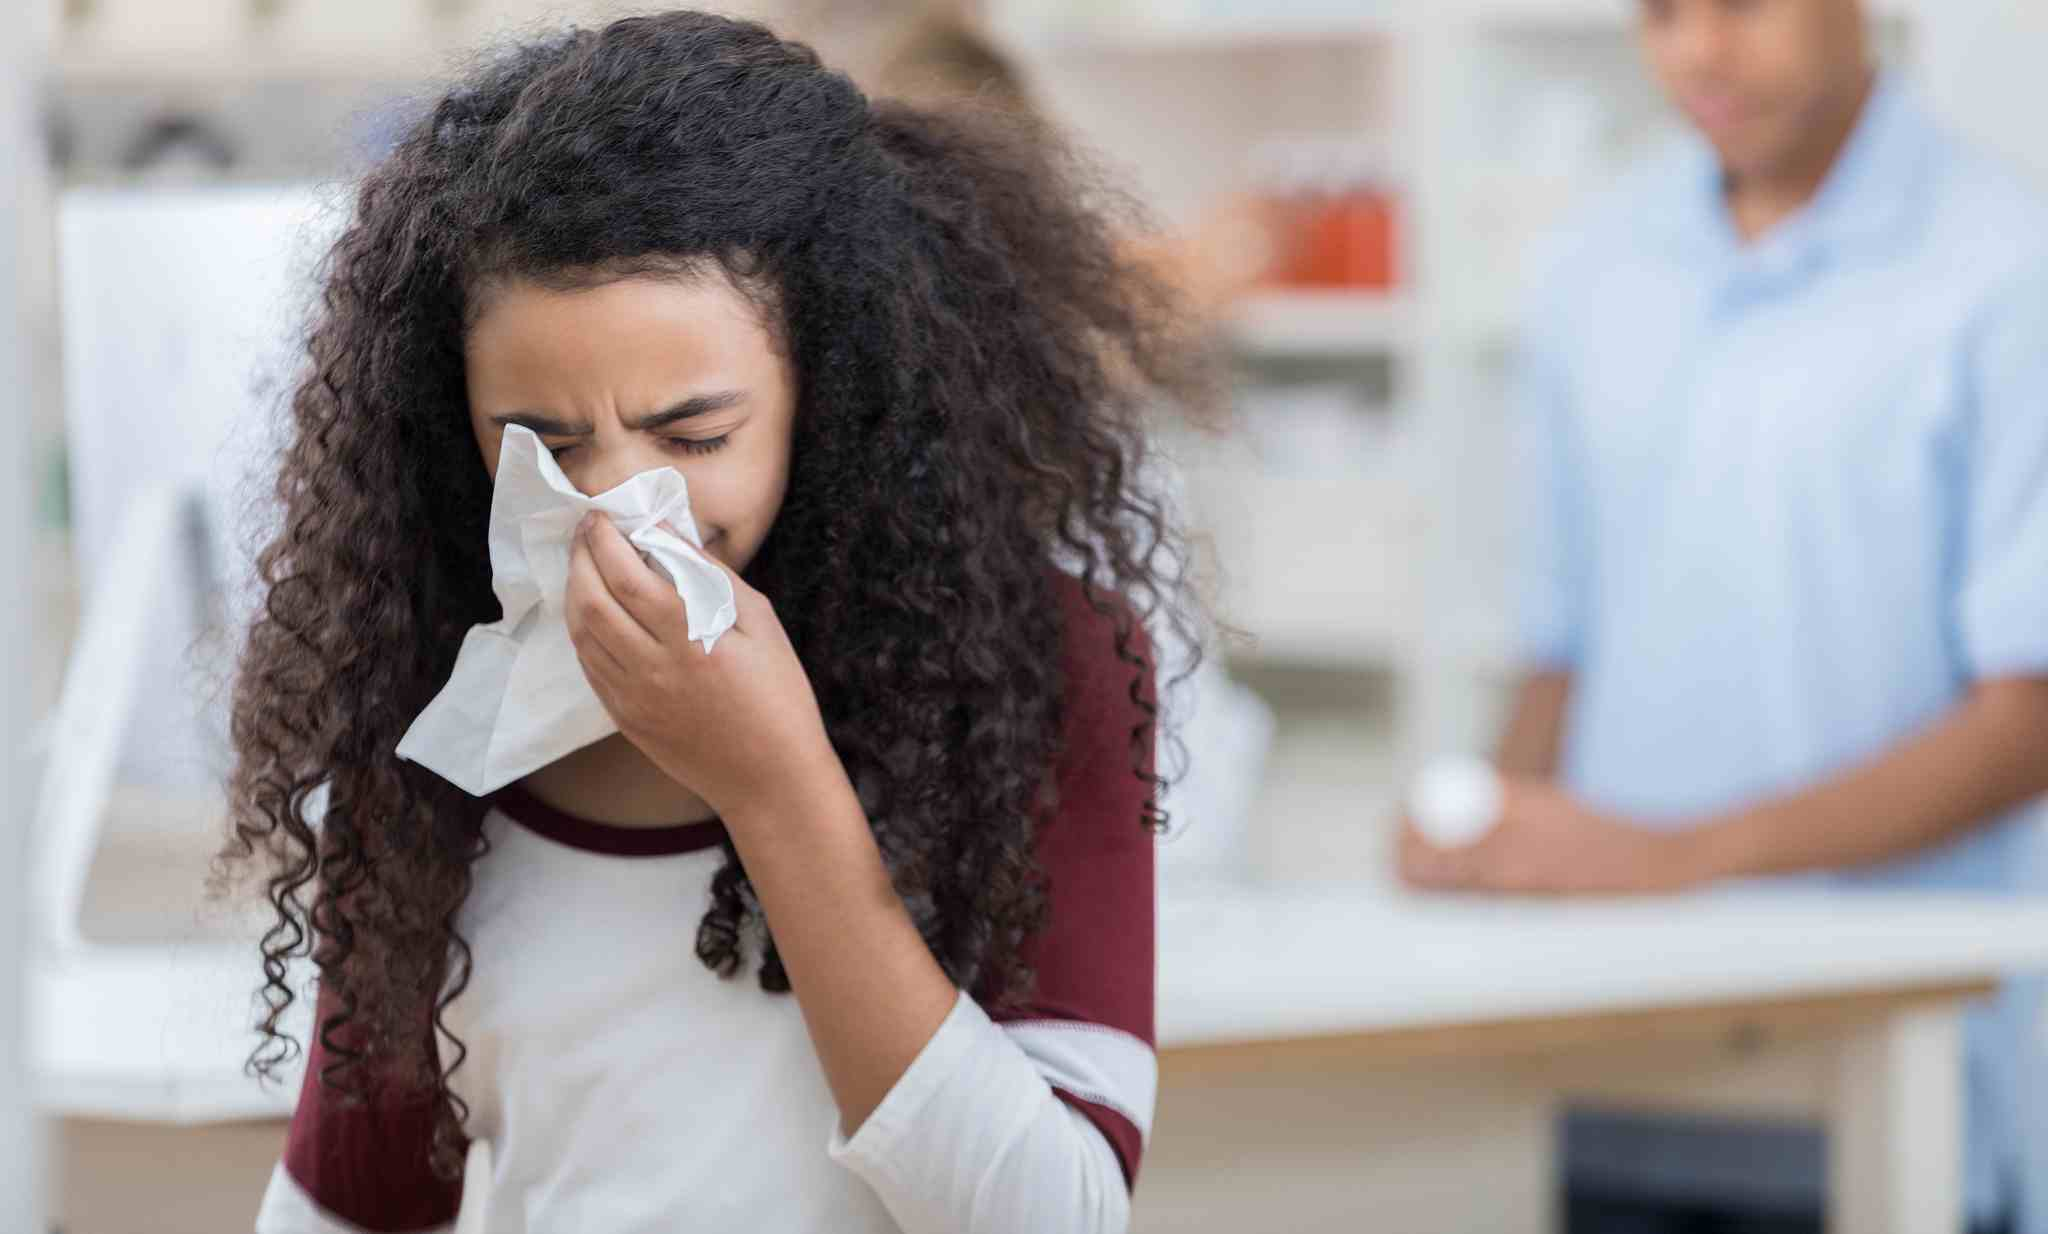 Nose picking and rubbing can spread pneumonia causing bacteria